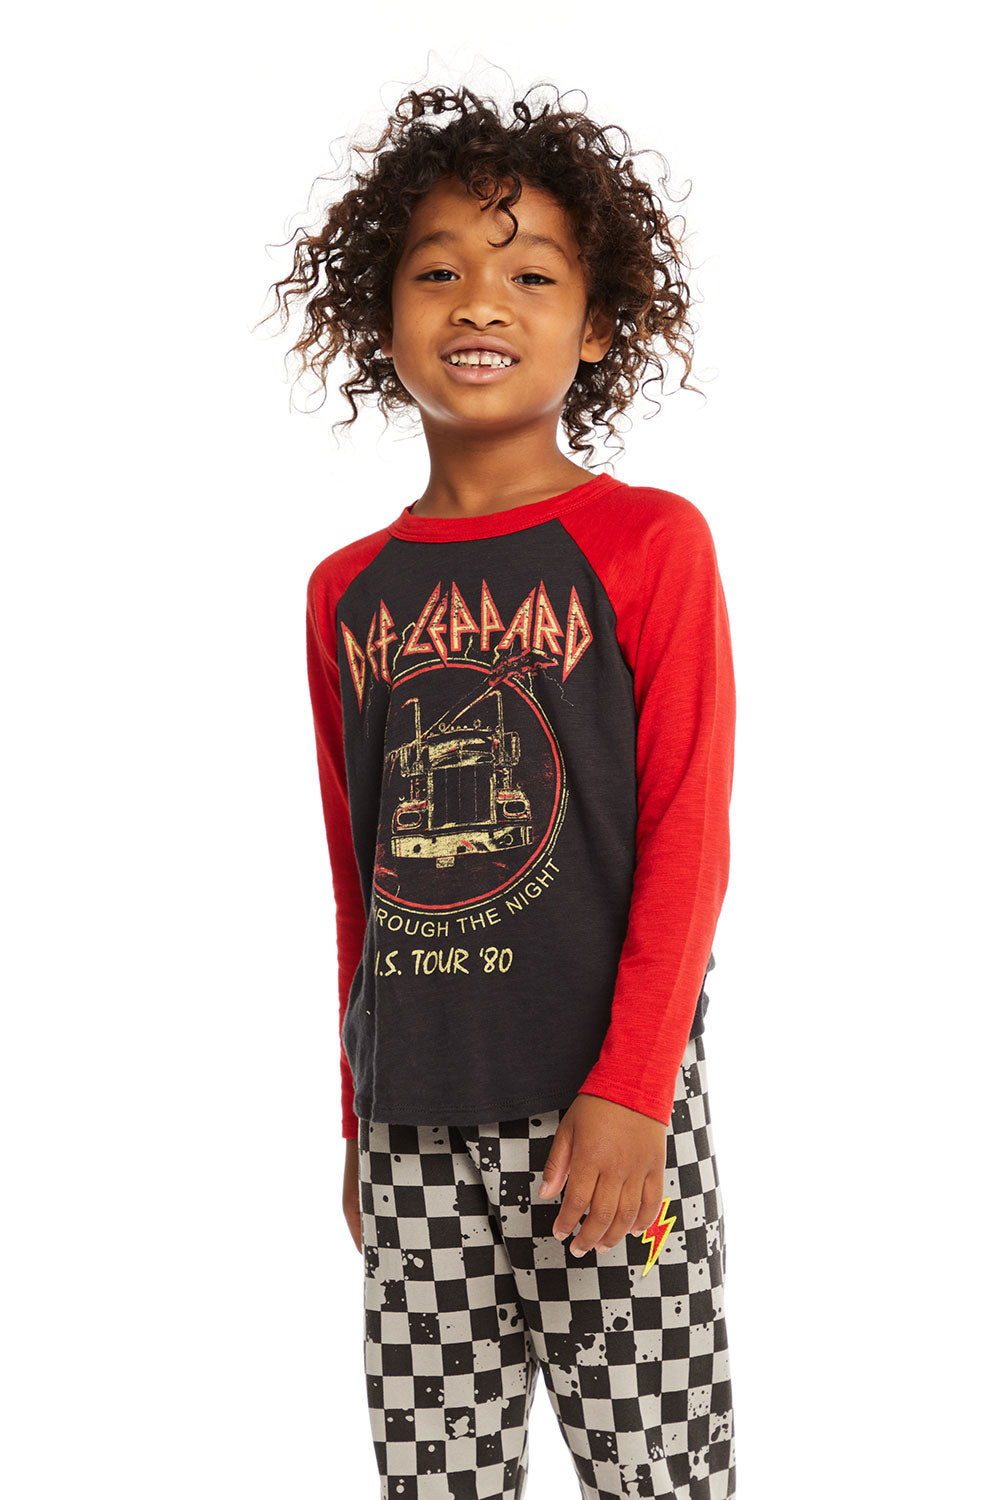 Def Leppard On Through The Night Long Sleeve BOYS chaserbrand